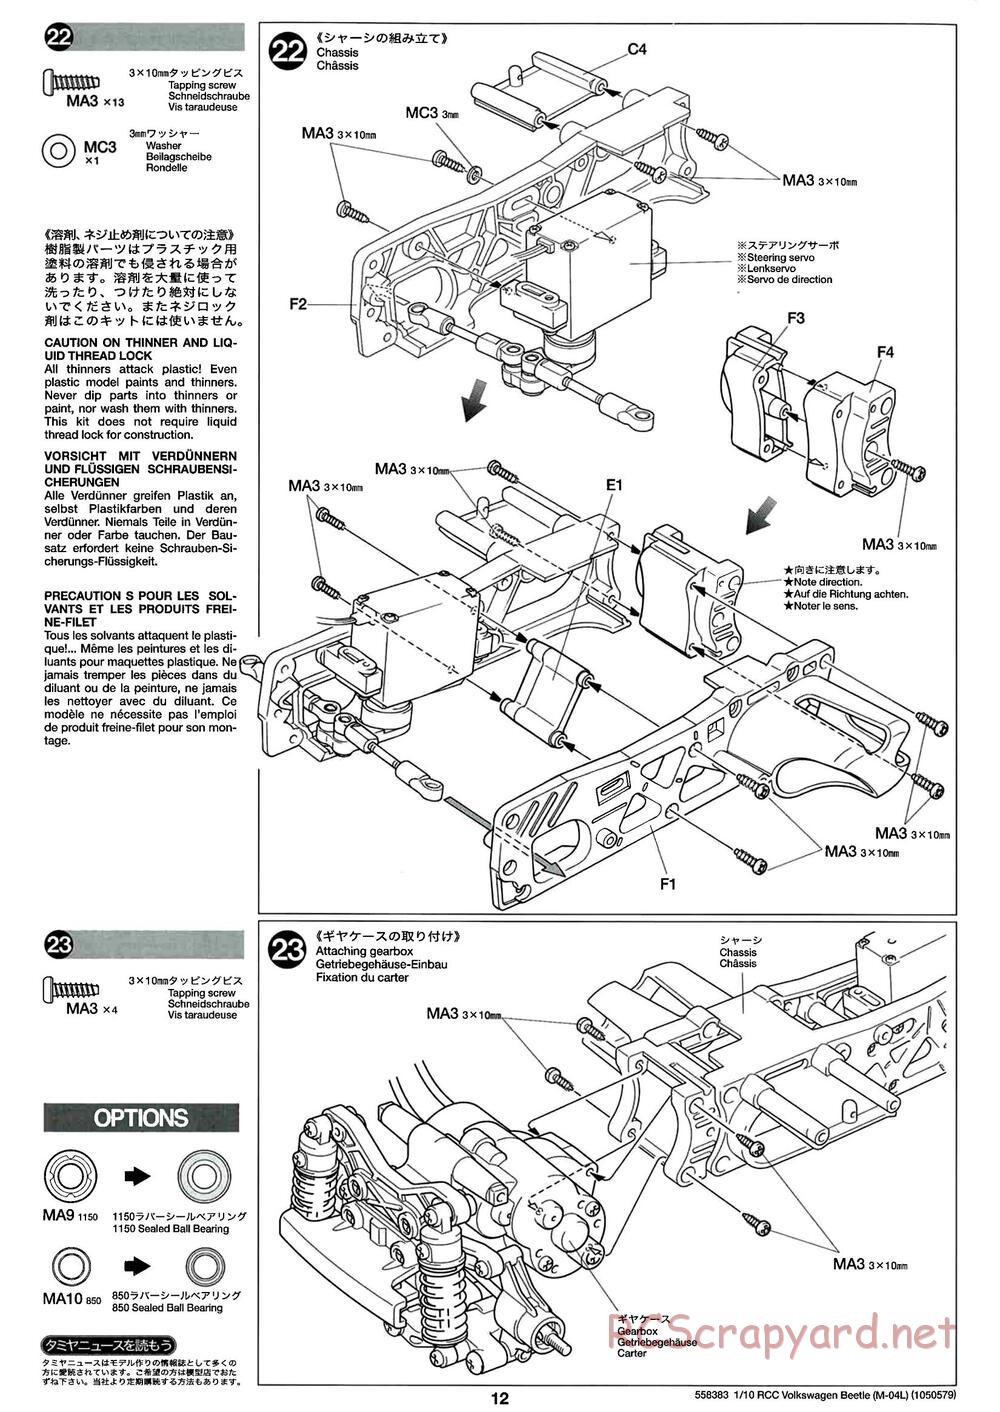 Tamiya - Volkswagen Beetle - M04L Chassis - Manual - Page 12